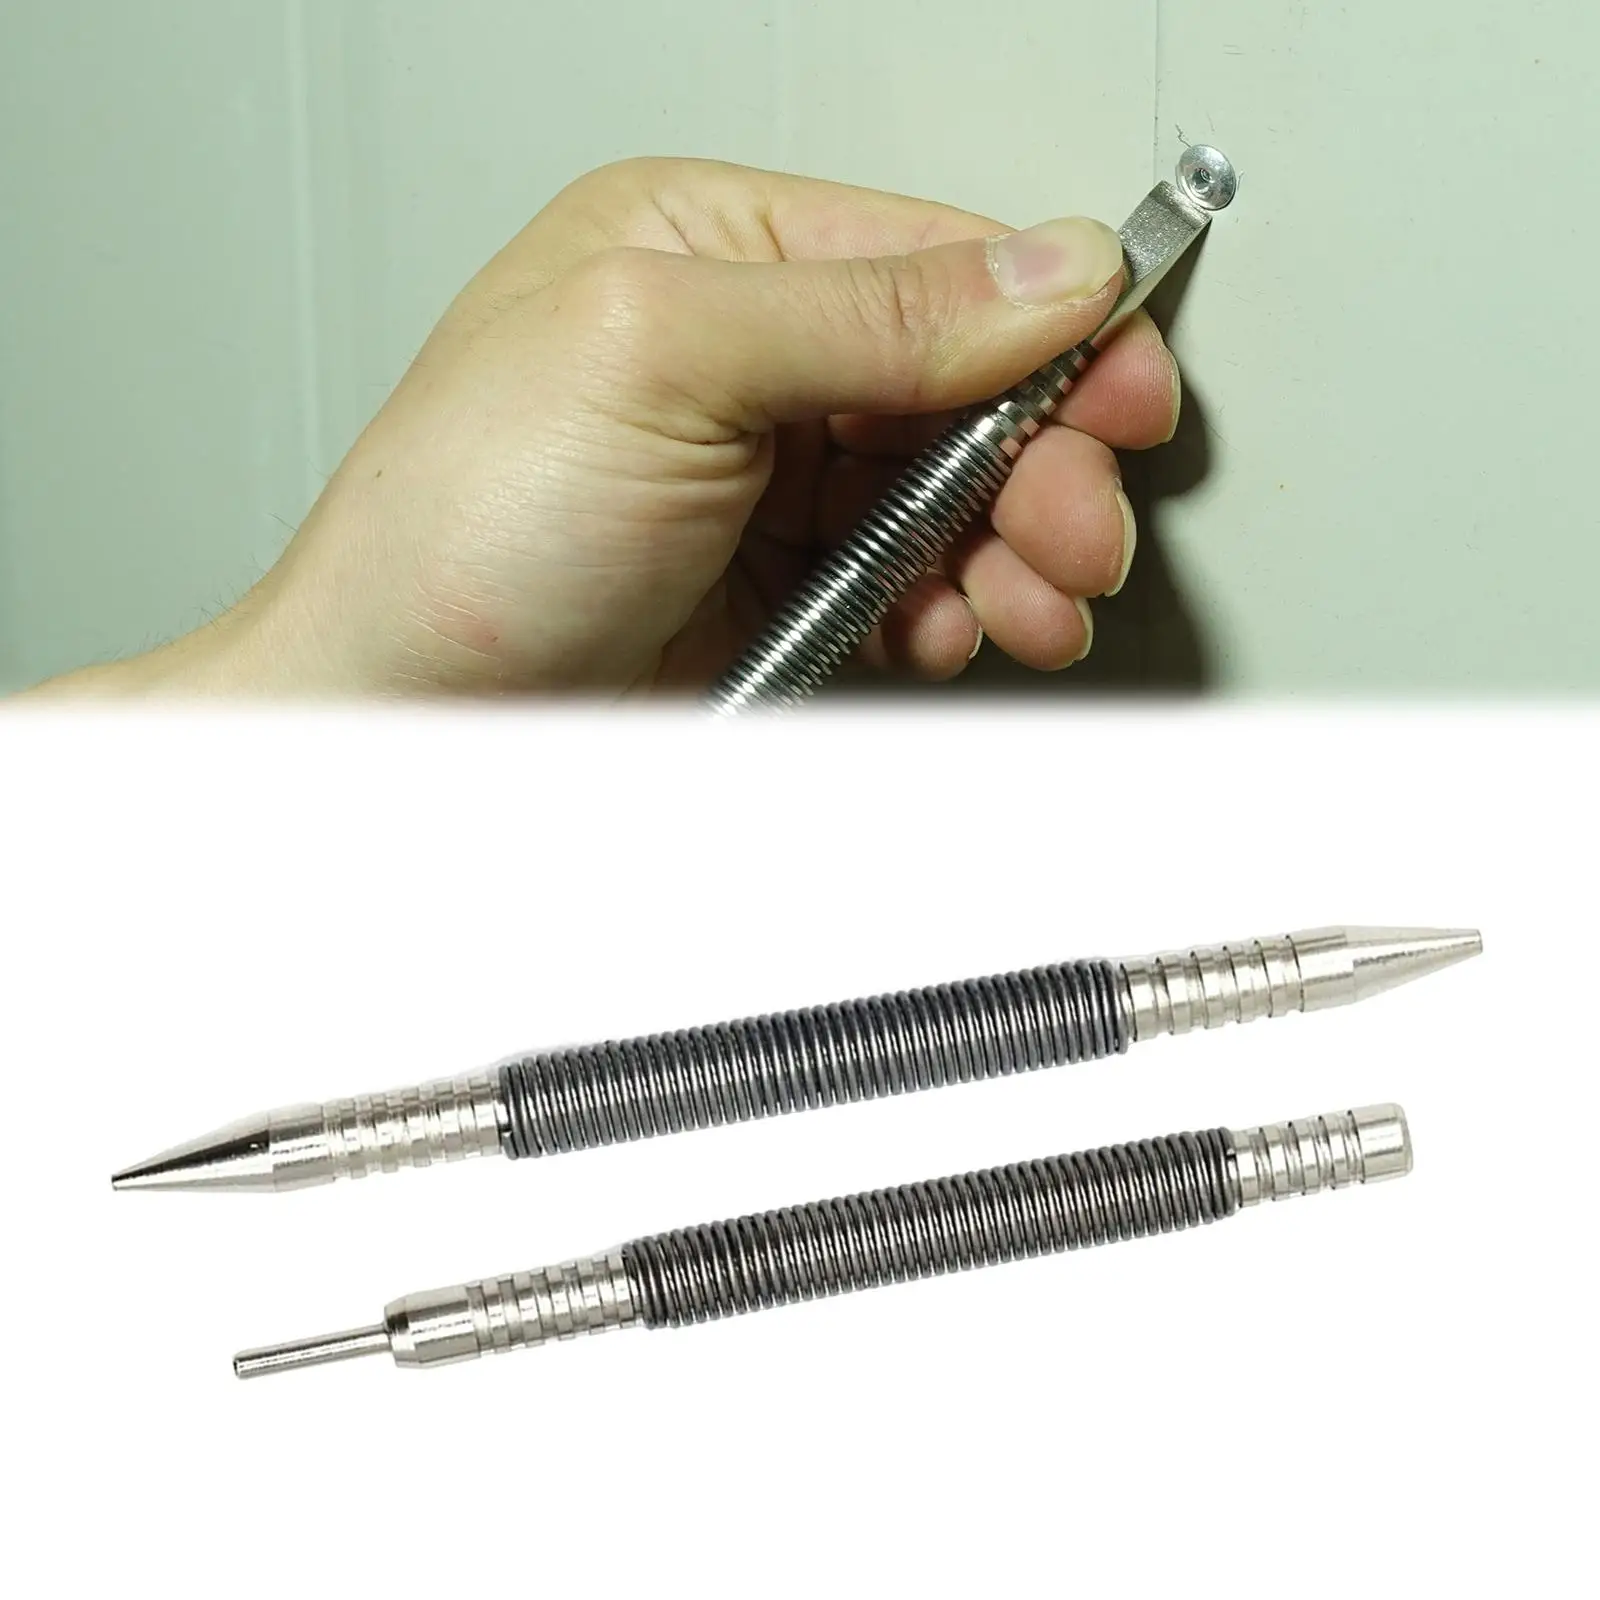 2 Pieces Nail Set and Remover Punch Set, Heavy Duty, Small Spring Nail Set, Punch Nail Hammerless Door Pin Removal Tool